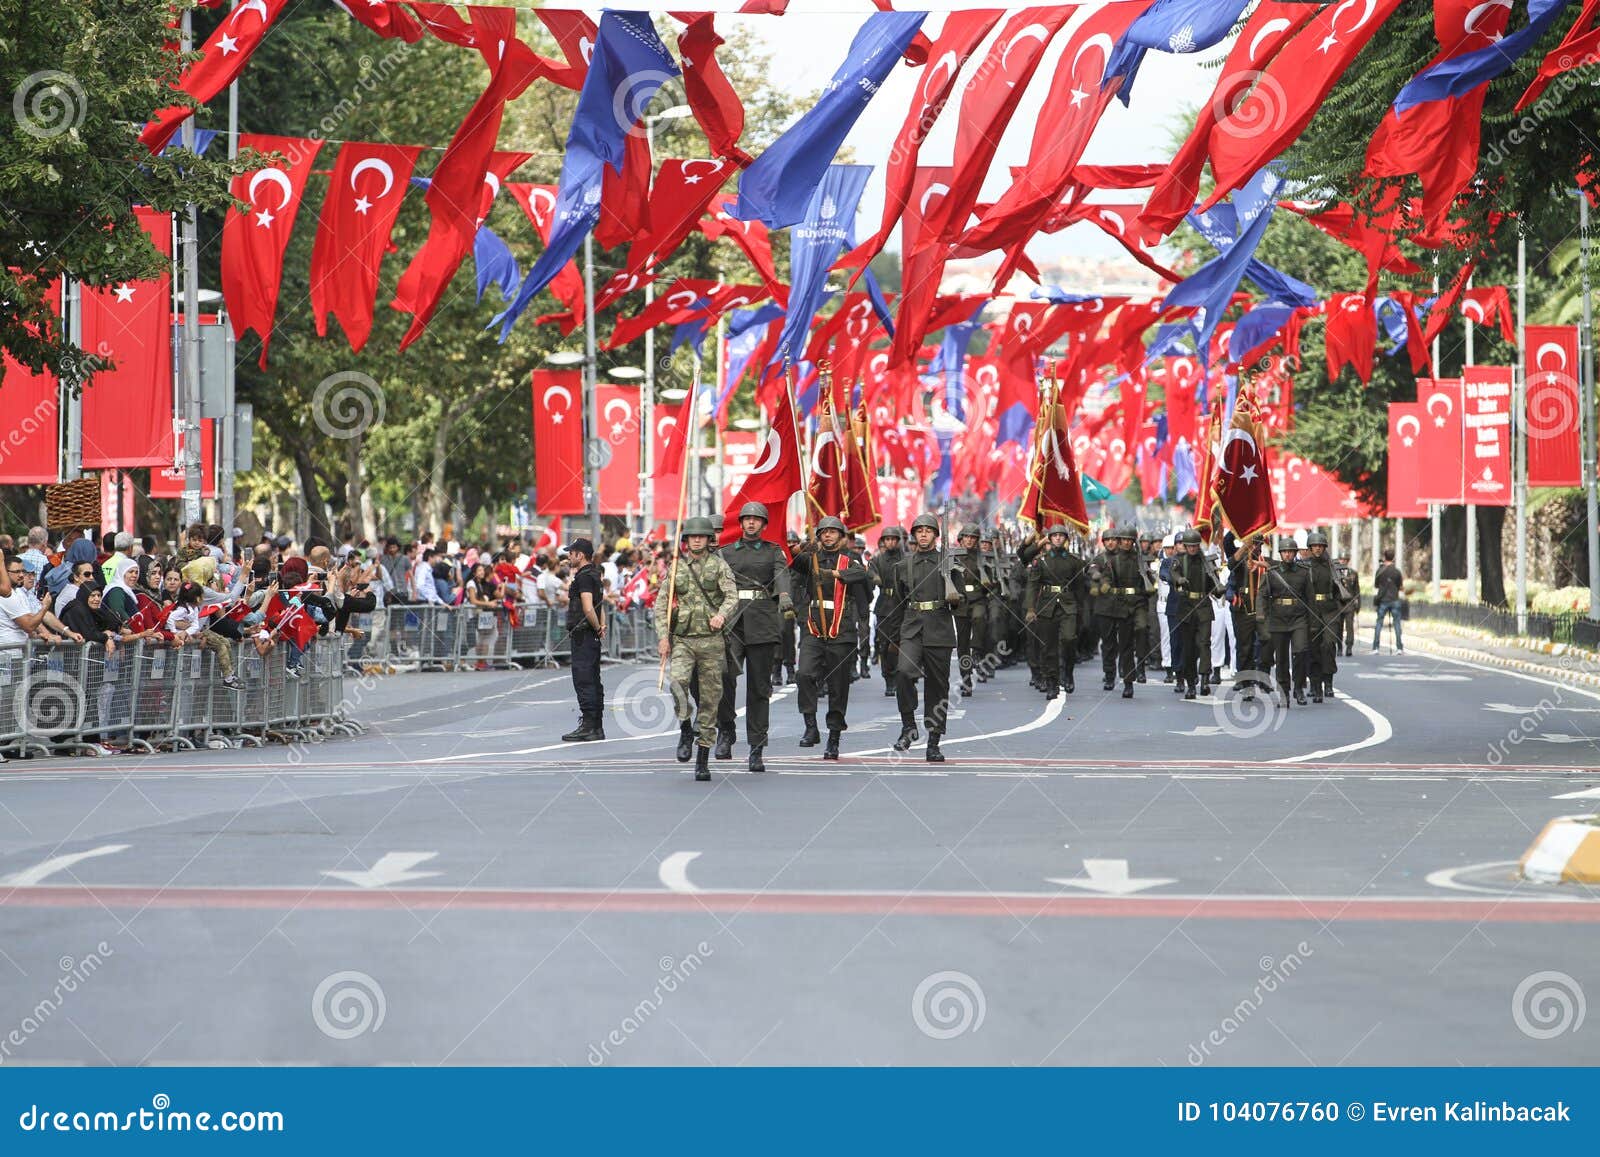 30 August Turkish Victory Day Editorial Image Image of ataturk